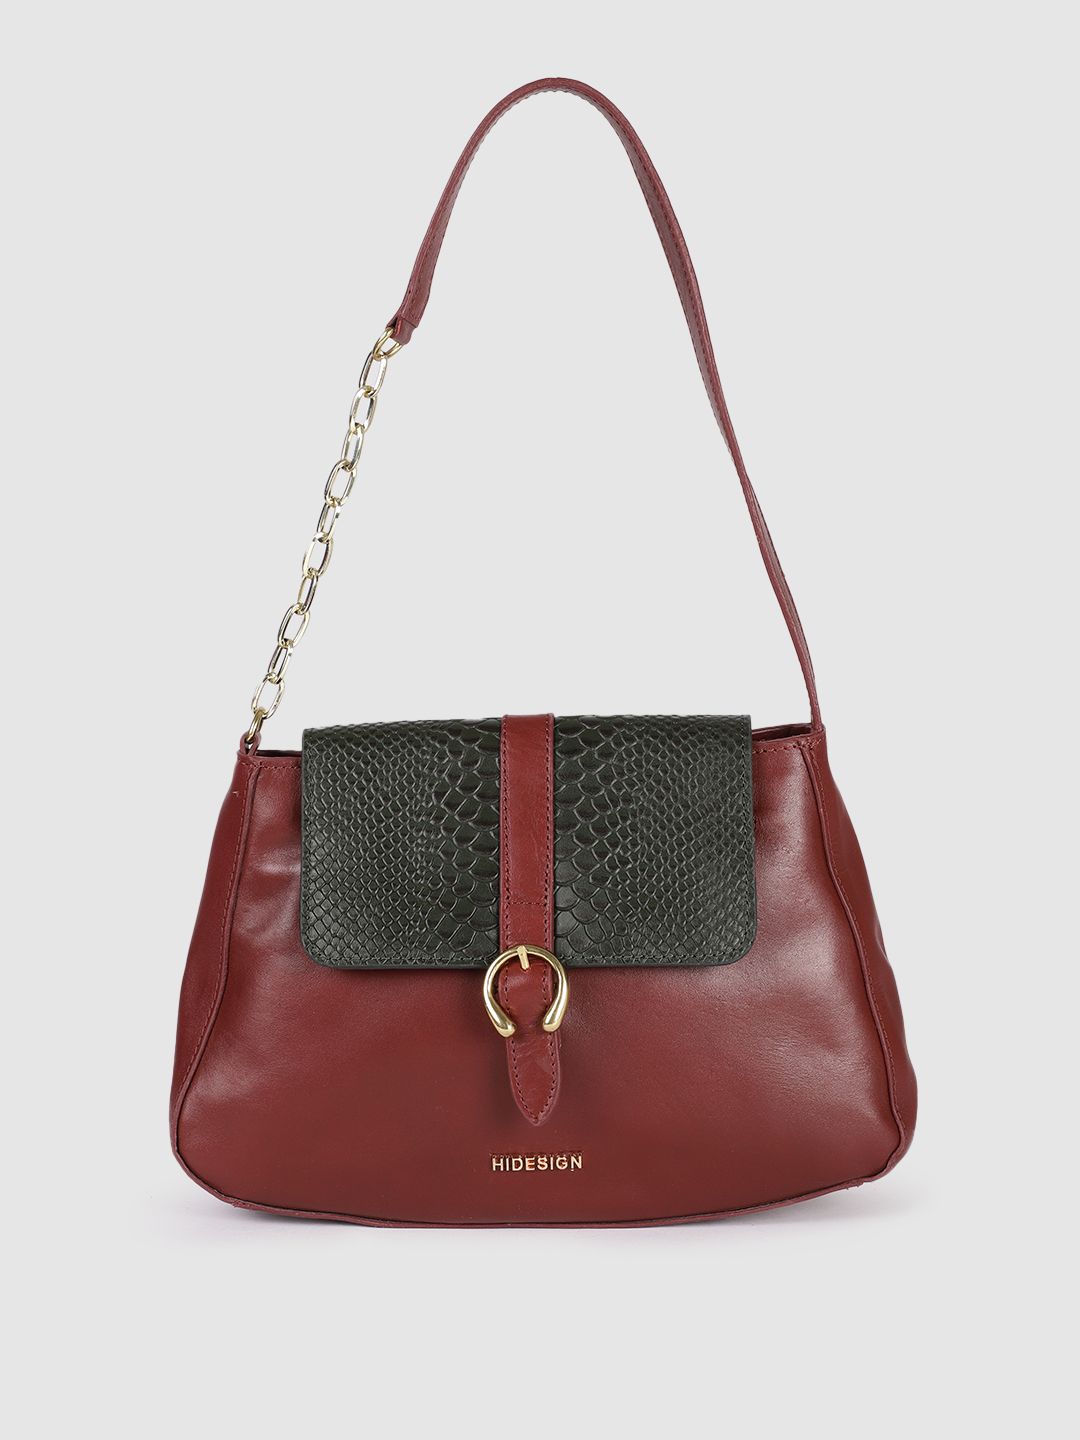 Hidesign Maroon Leather Structured Satchel Price in India